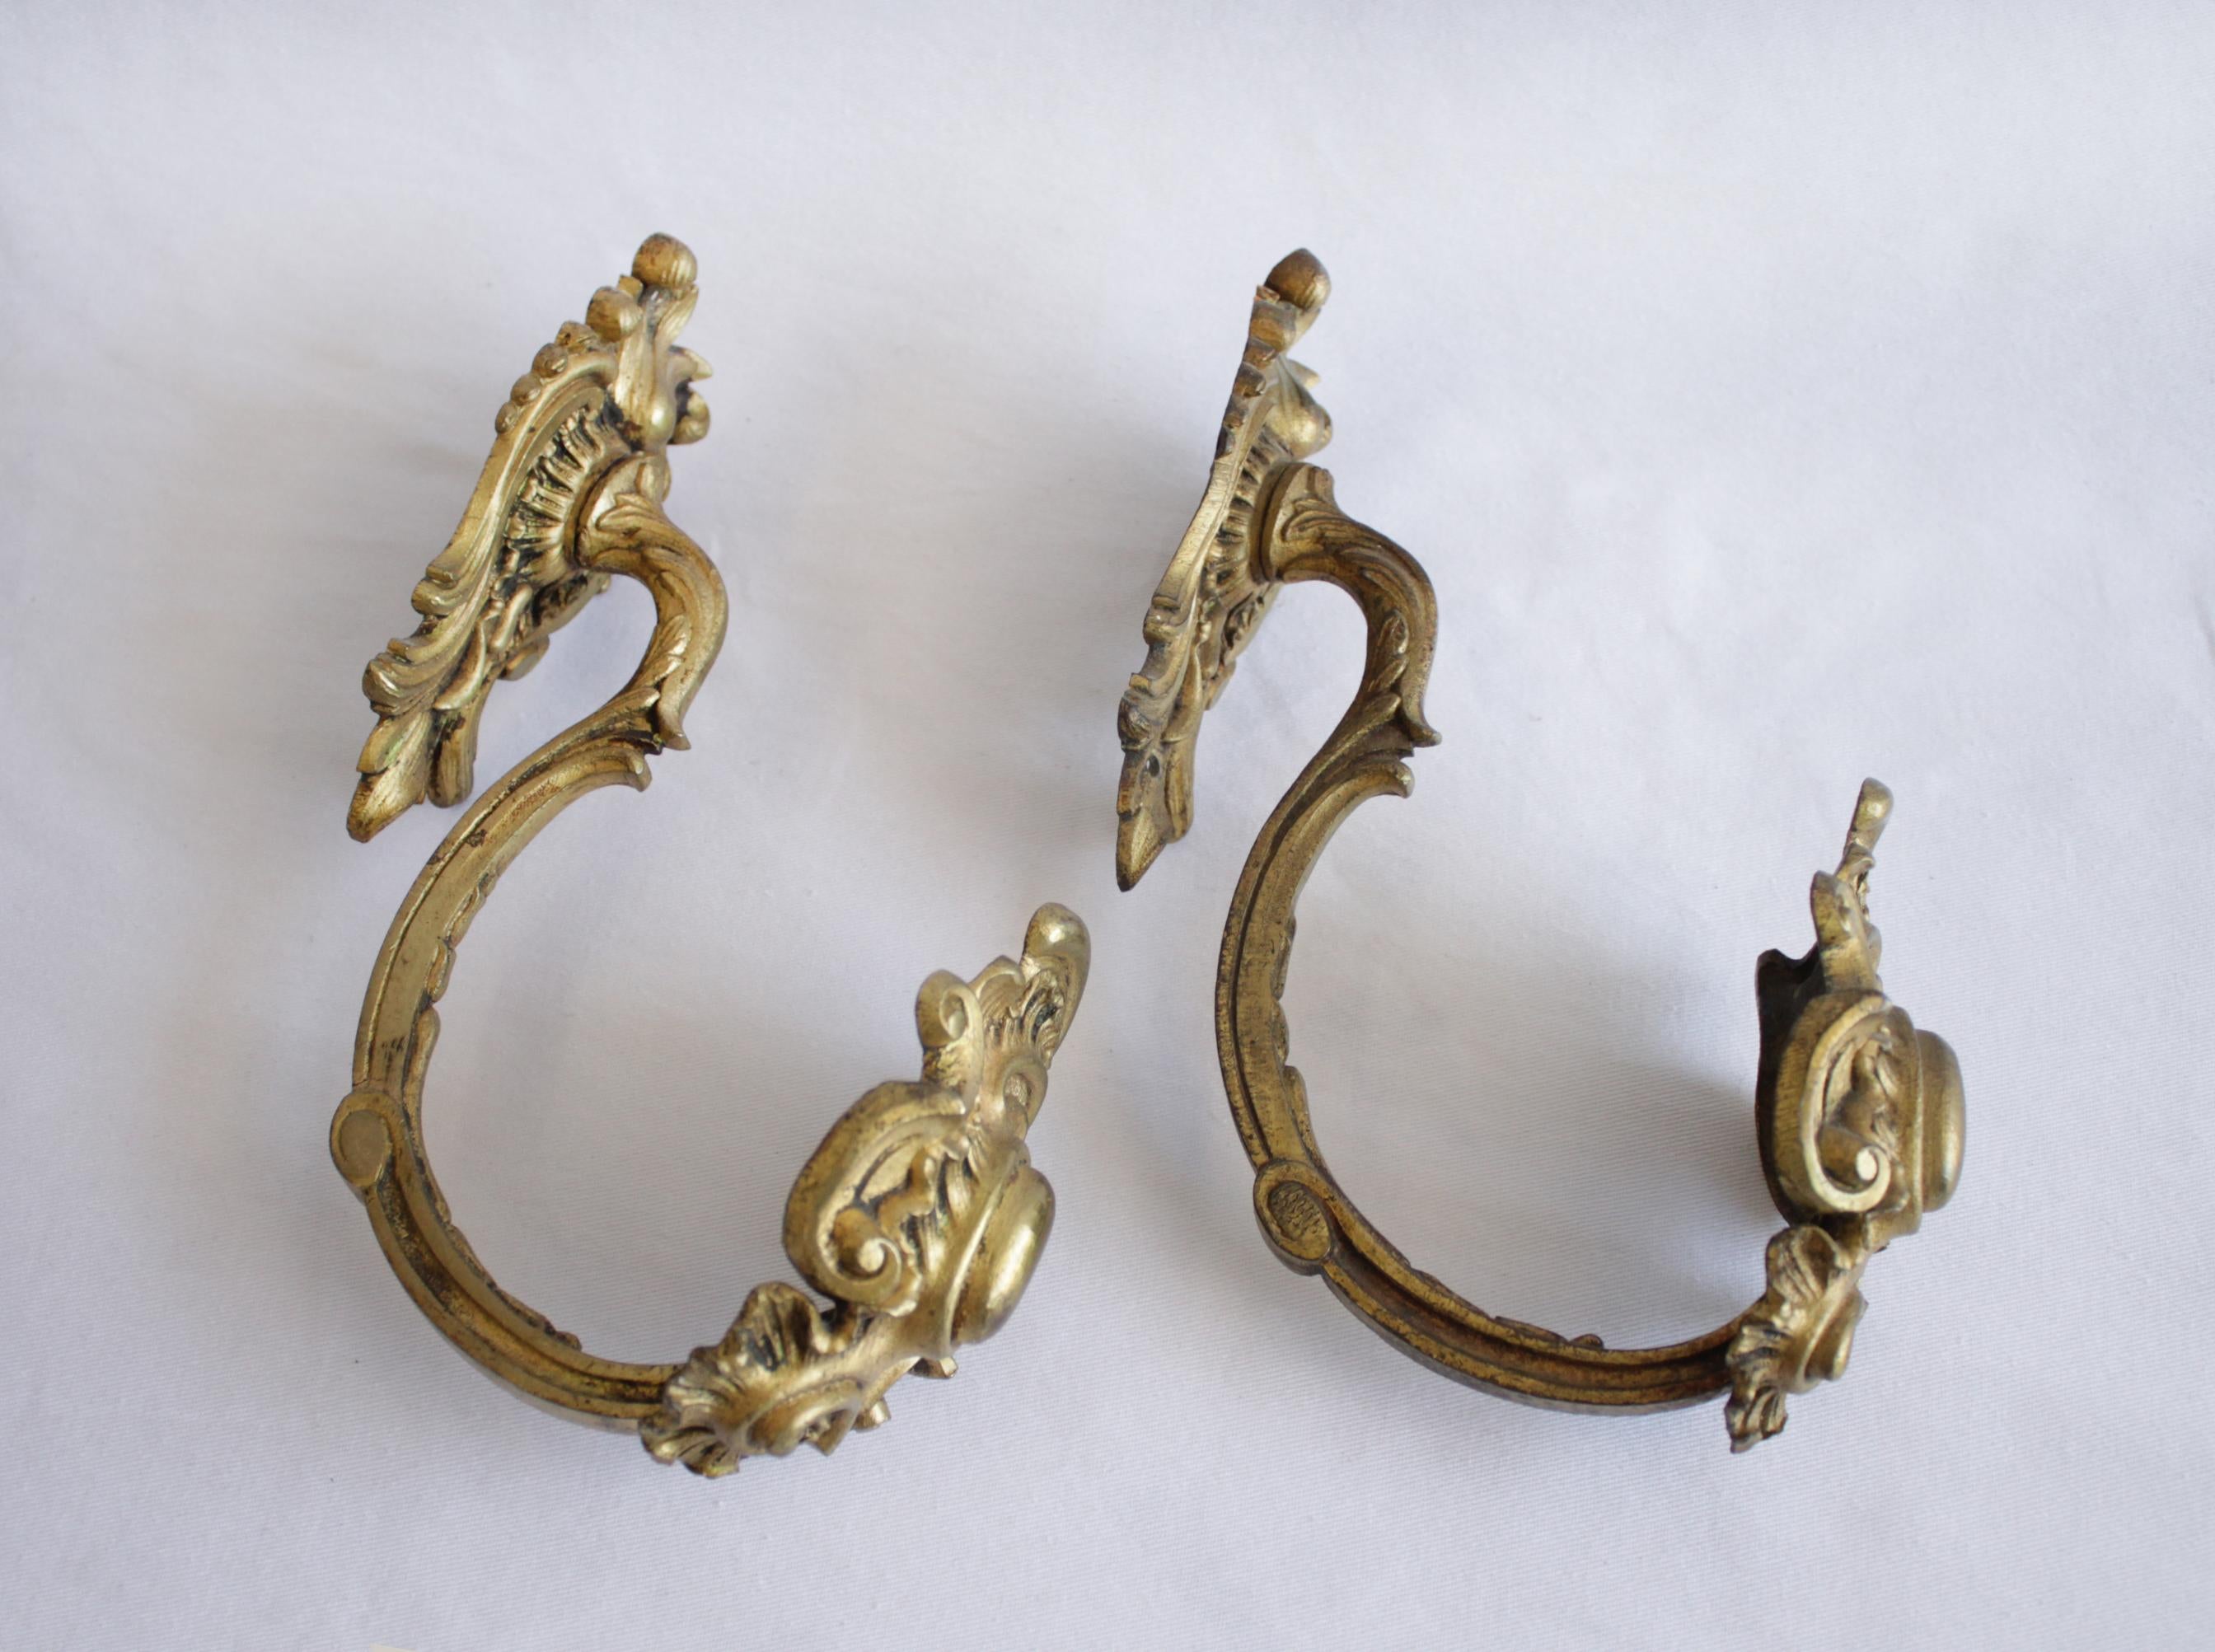 Antique French Louis Gilded Curtain Buckle/Tie Back 1 Pair 2 pieces 